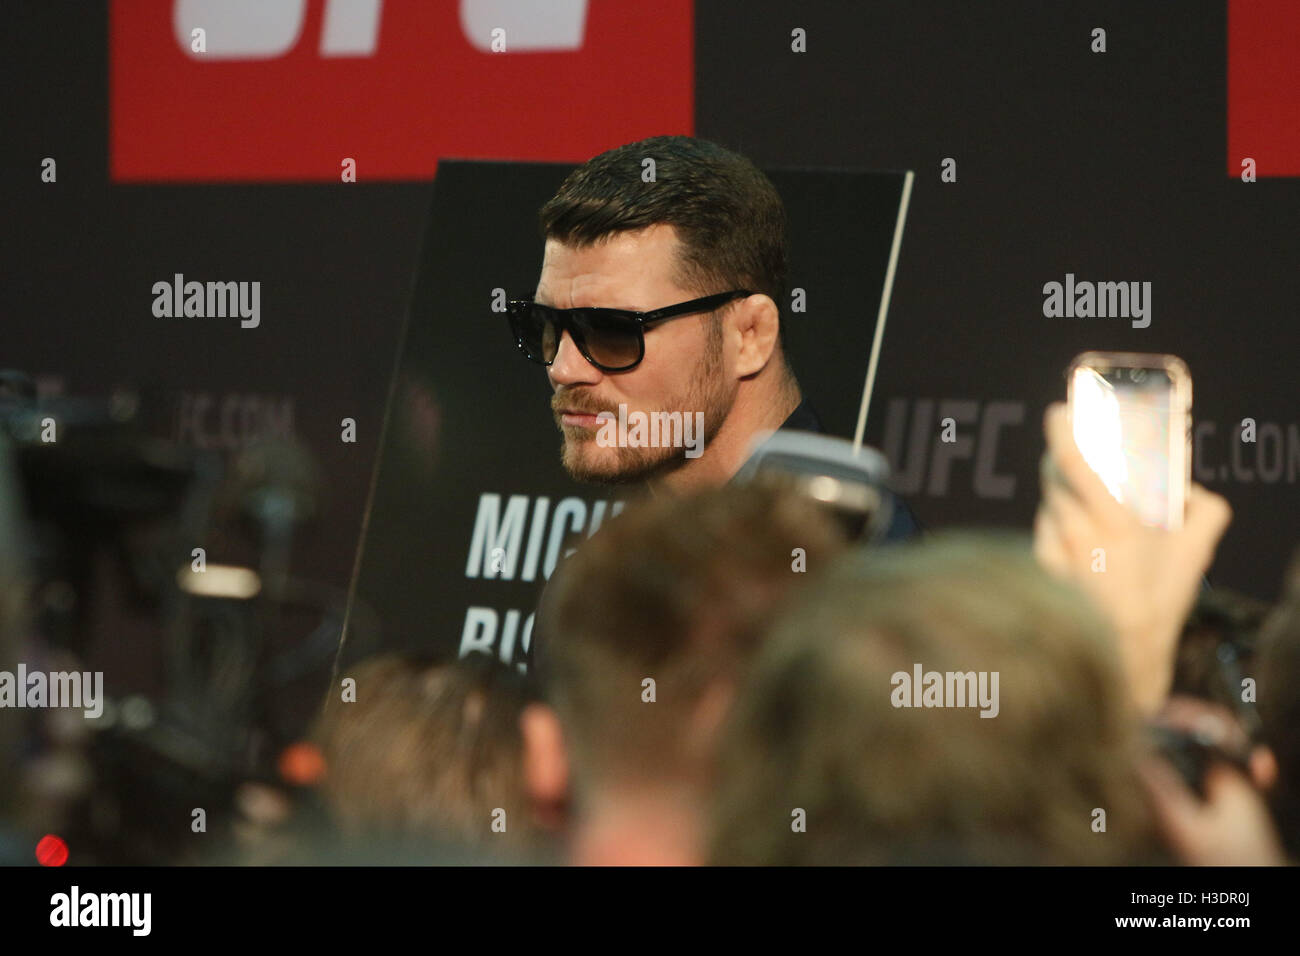 Manchester, UK. 6th October, 2016. UFC 204 - Media Day at Arena Manchester. Thursday the 6 of Oct. 2016. Michael Bisping answers media questions ahead of UFC 204.   Credit:  Dan Cooke/Alamy Live News Stock Photo